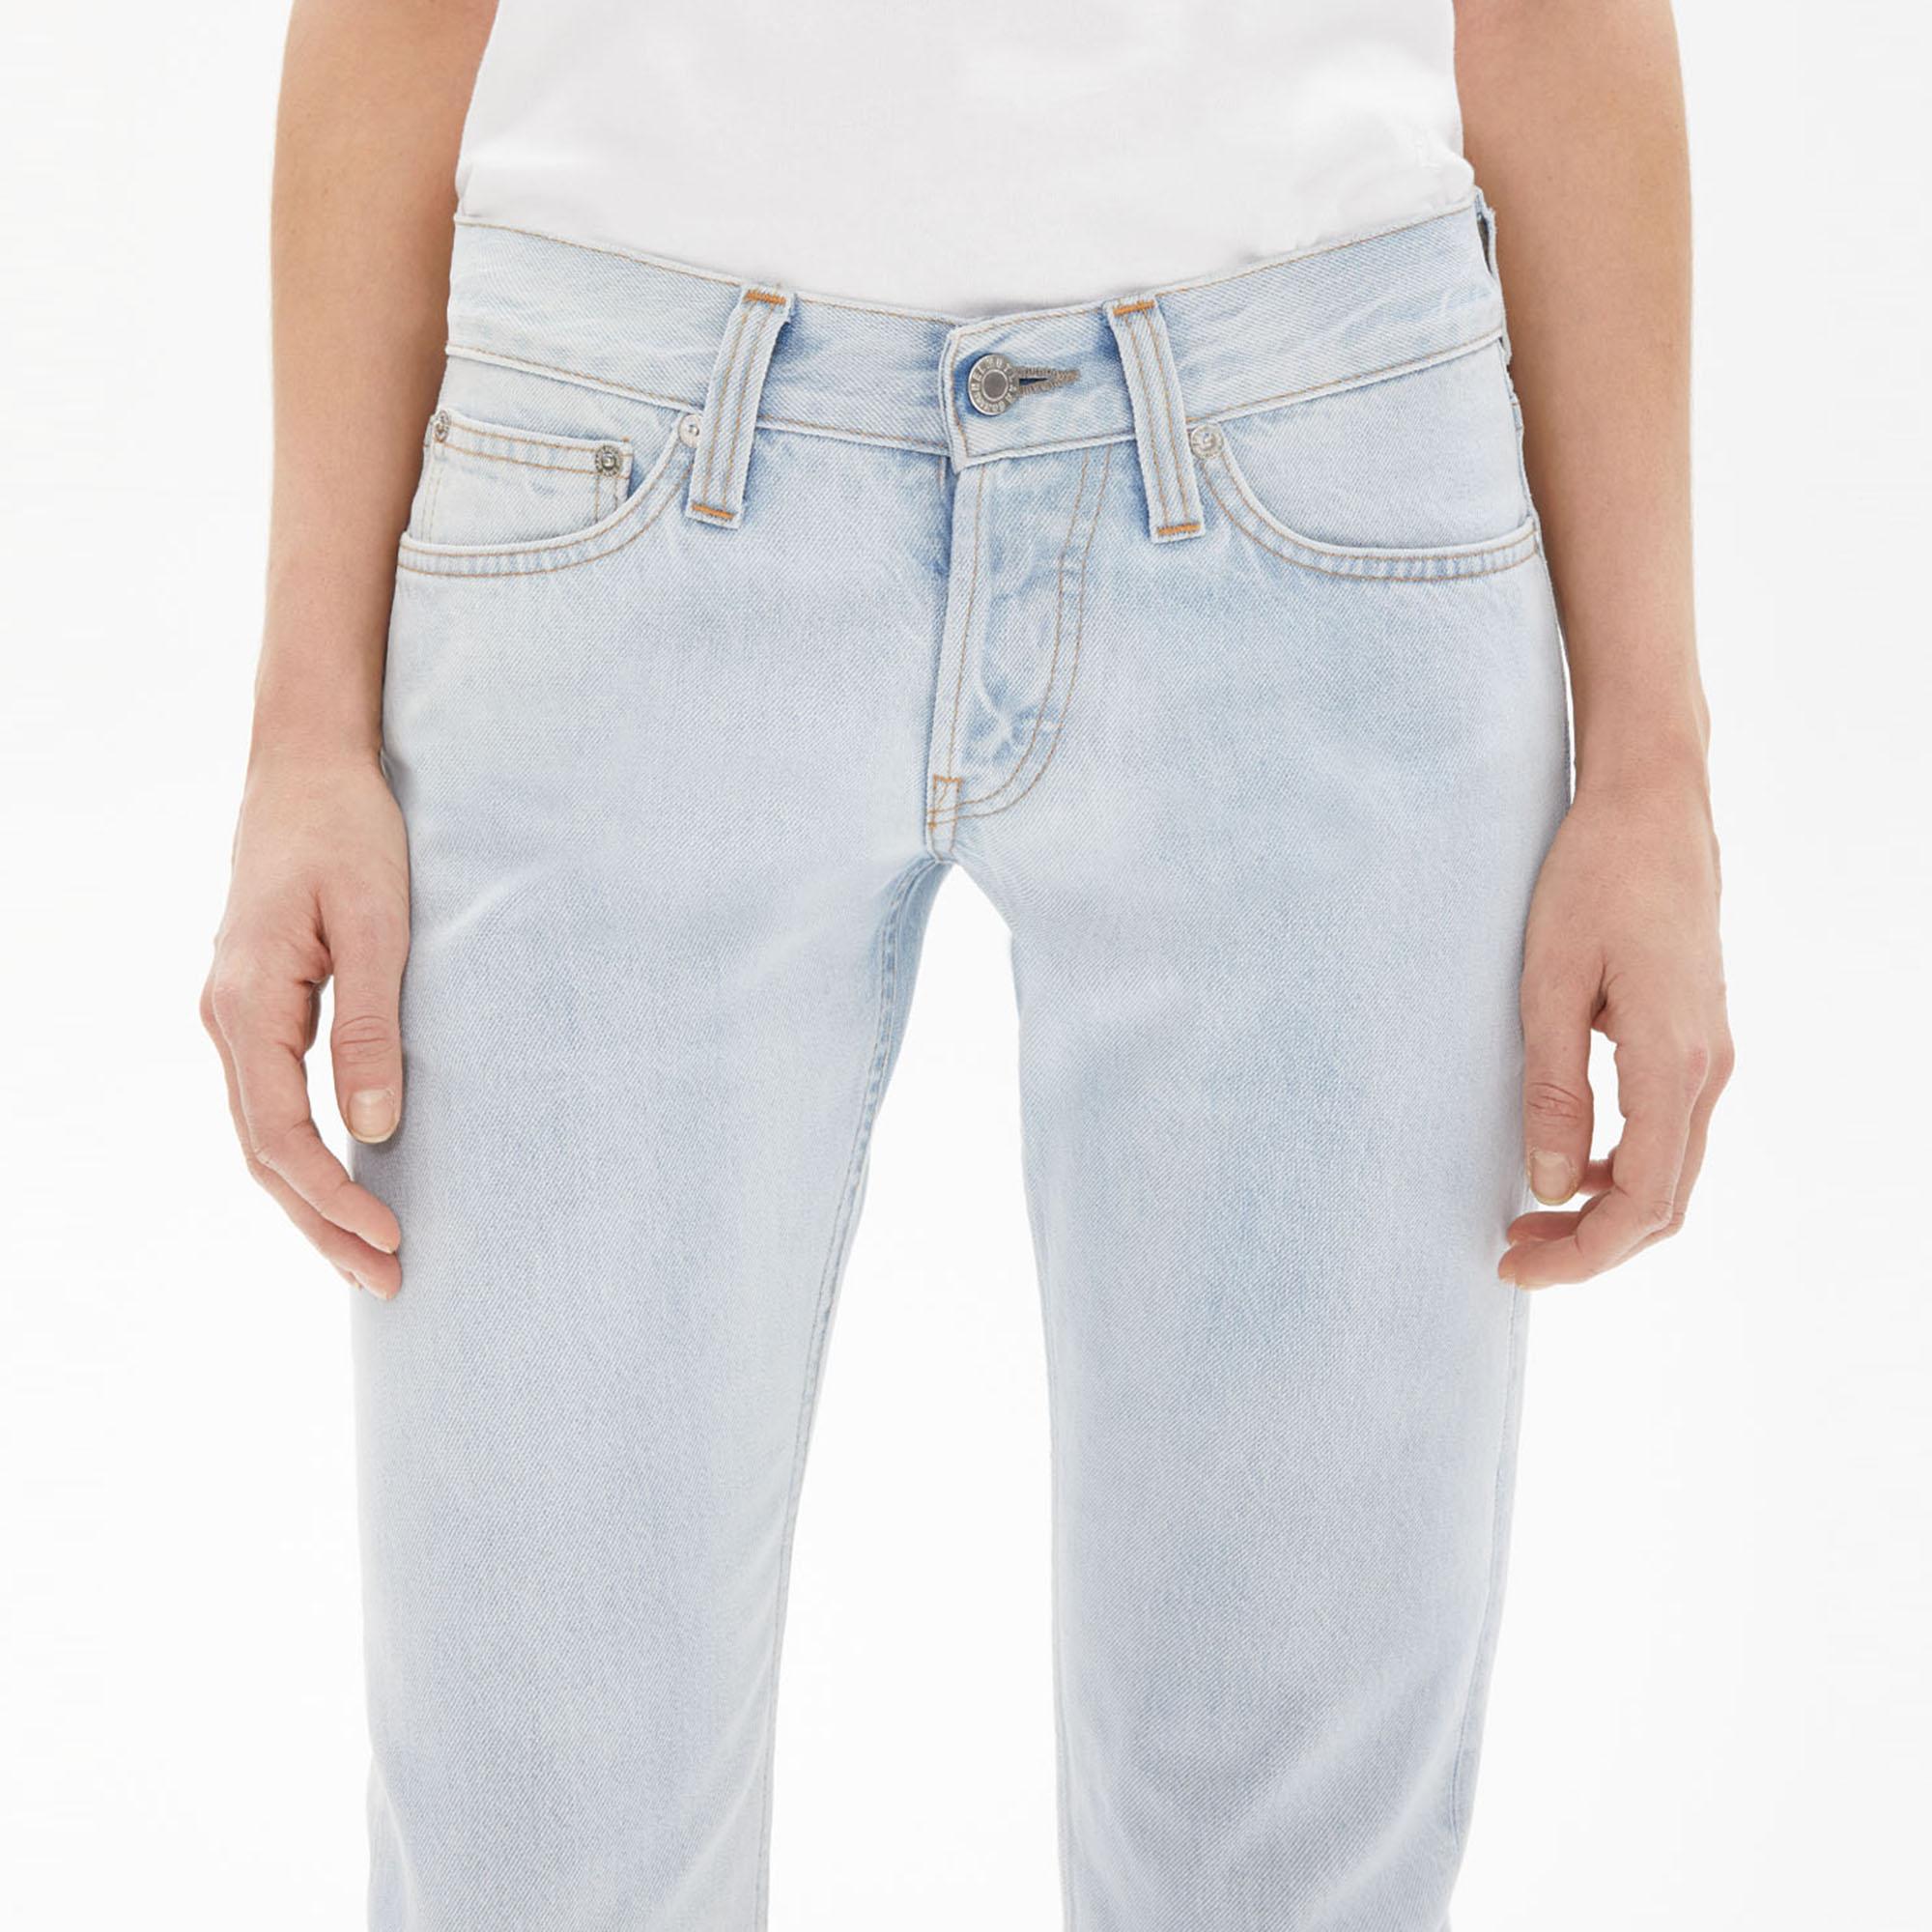 The Helmut Lang masc lo drainpipe jeans in accelerated flat bleach ...